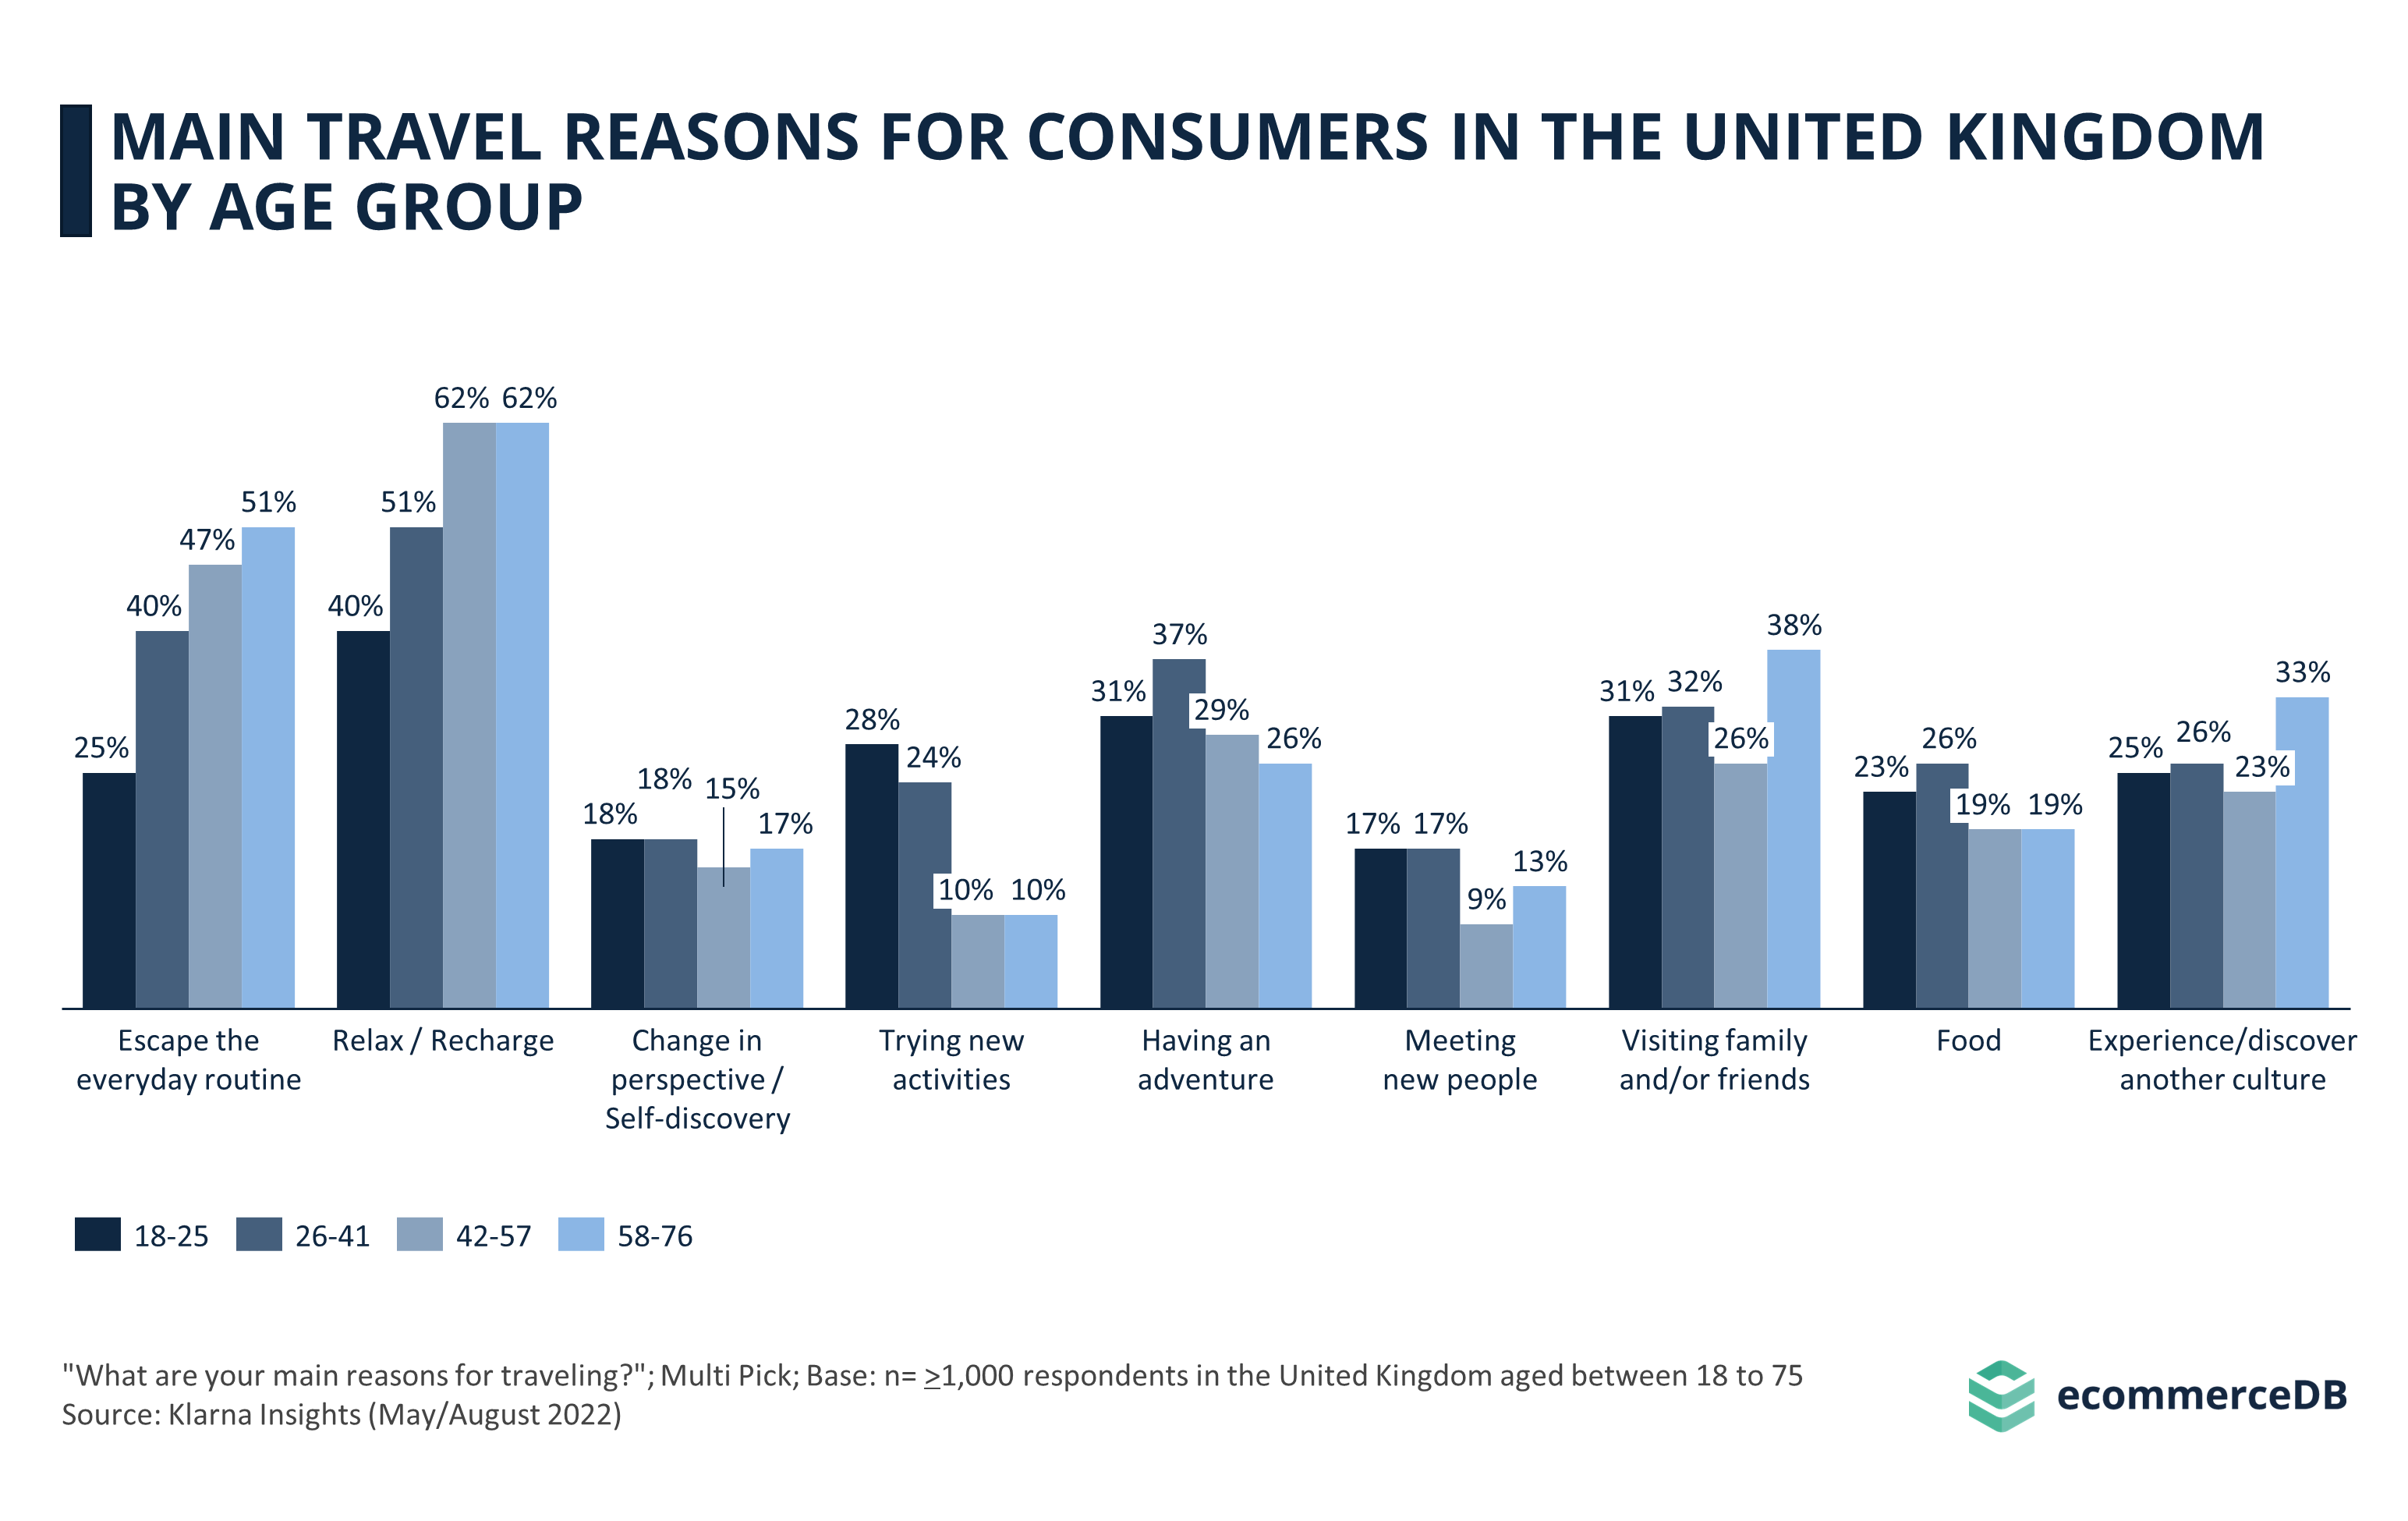 Main Travel Reasons for Consumers in the United Kingdom by Age Group